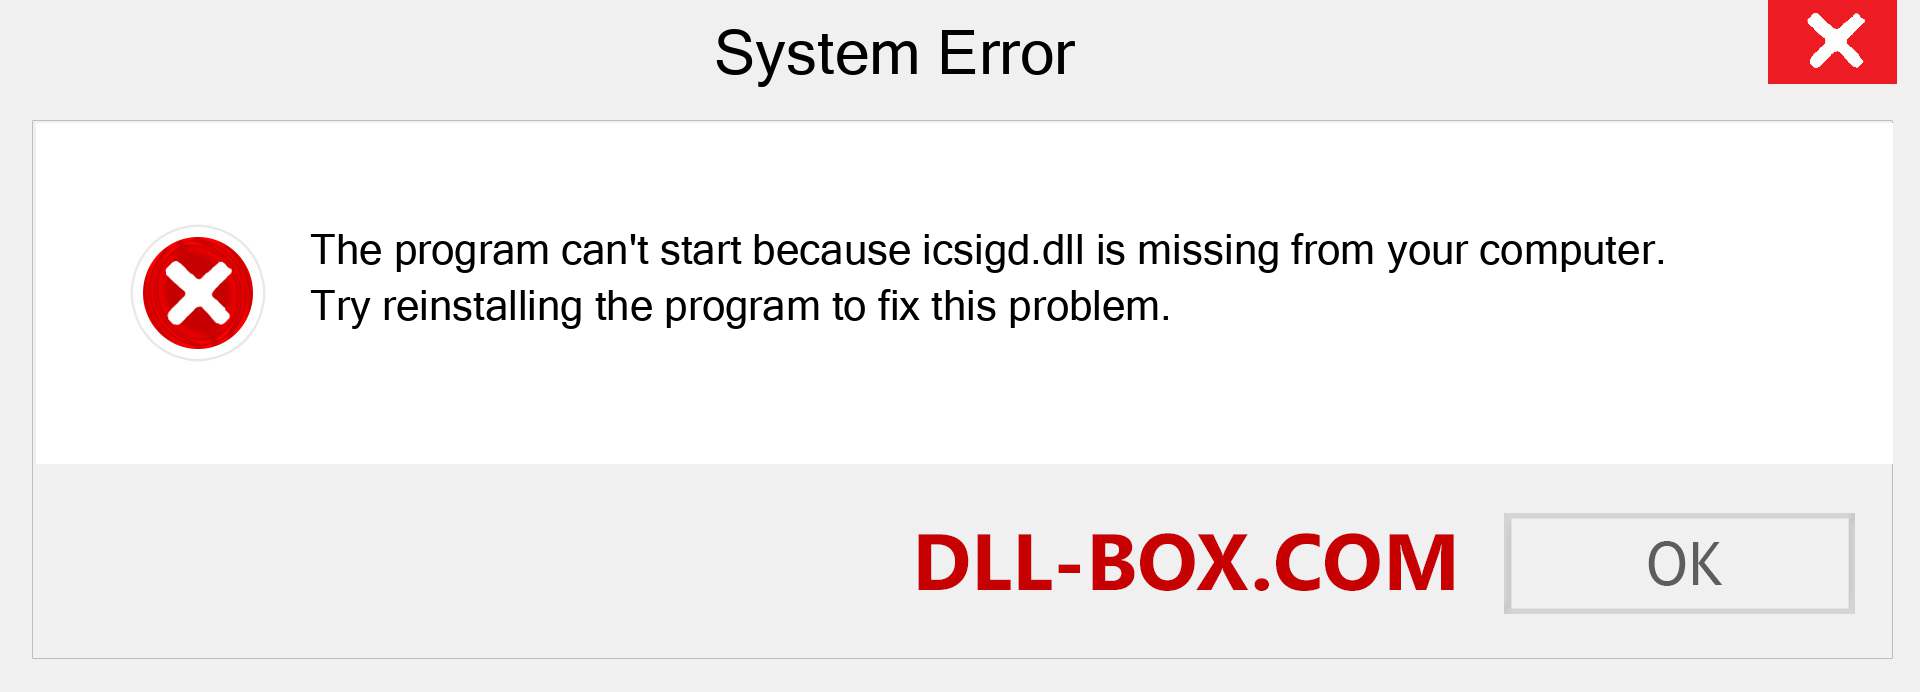  icsigd.dll file is missing?. Download for Windows 7, 8, 10 - Fix  icsigd dll Missing Error on Windows, photos, images